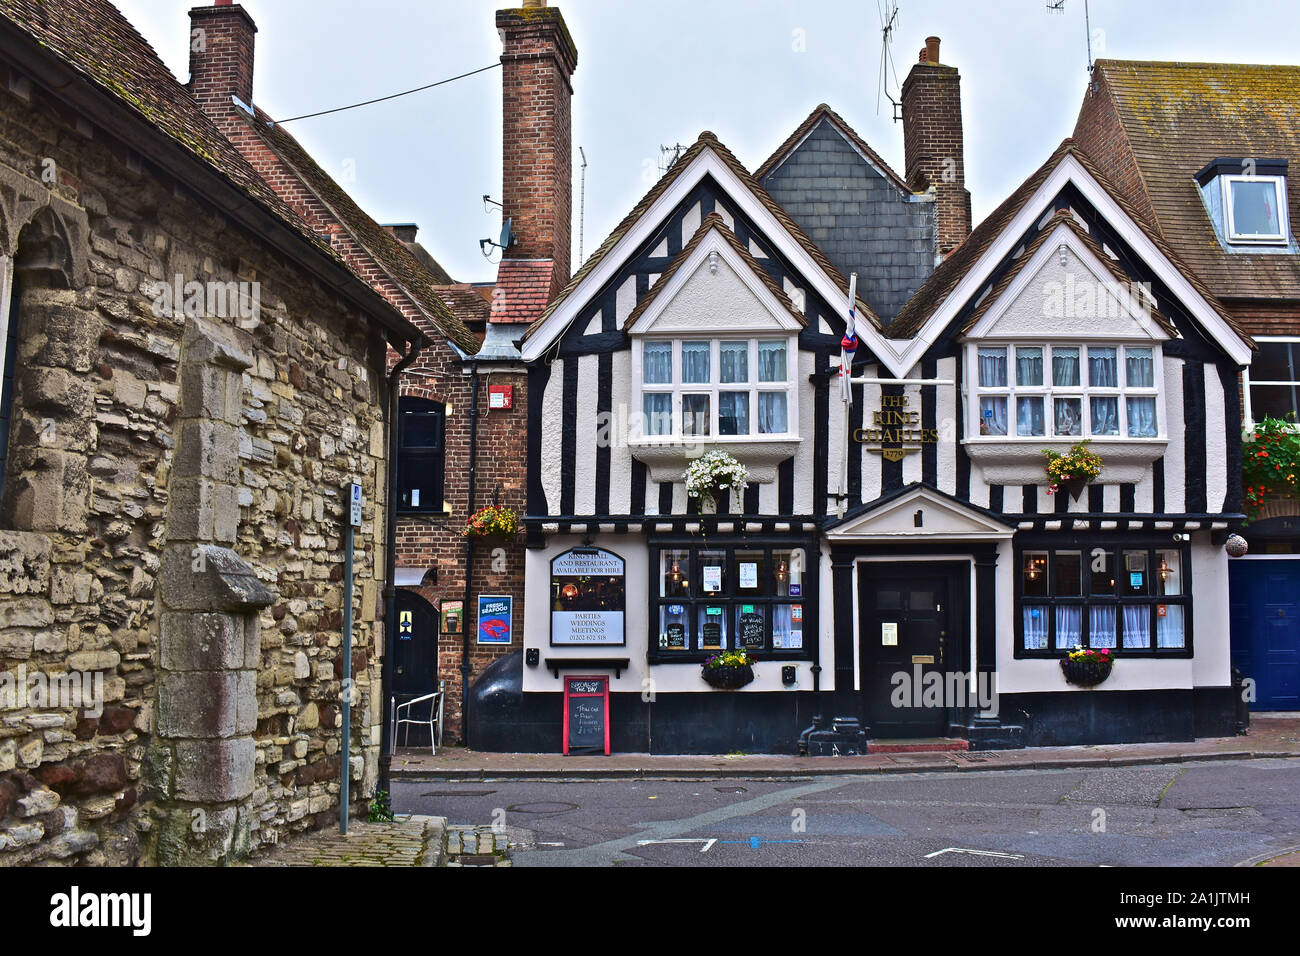 The King Charles public house the old town, dates back to 1770. A traditional English pub selling food & drink, it is also reputedly haunted. Stock Photo